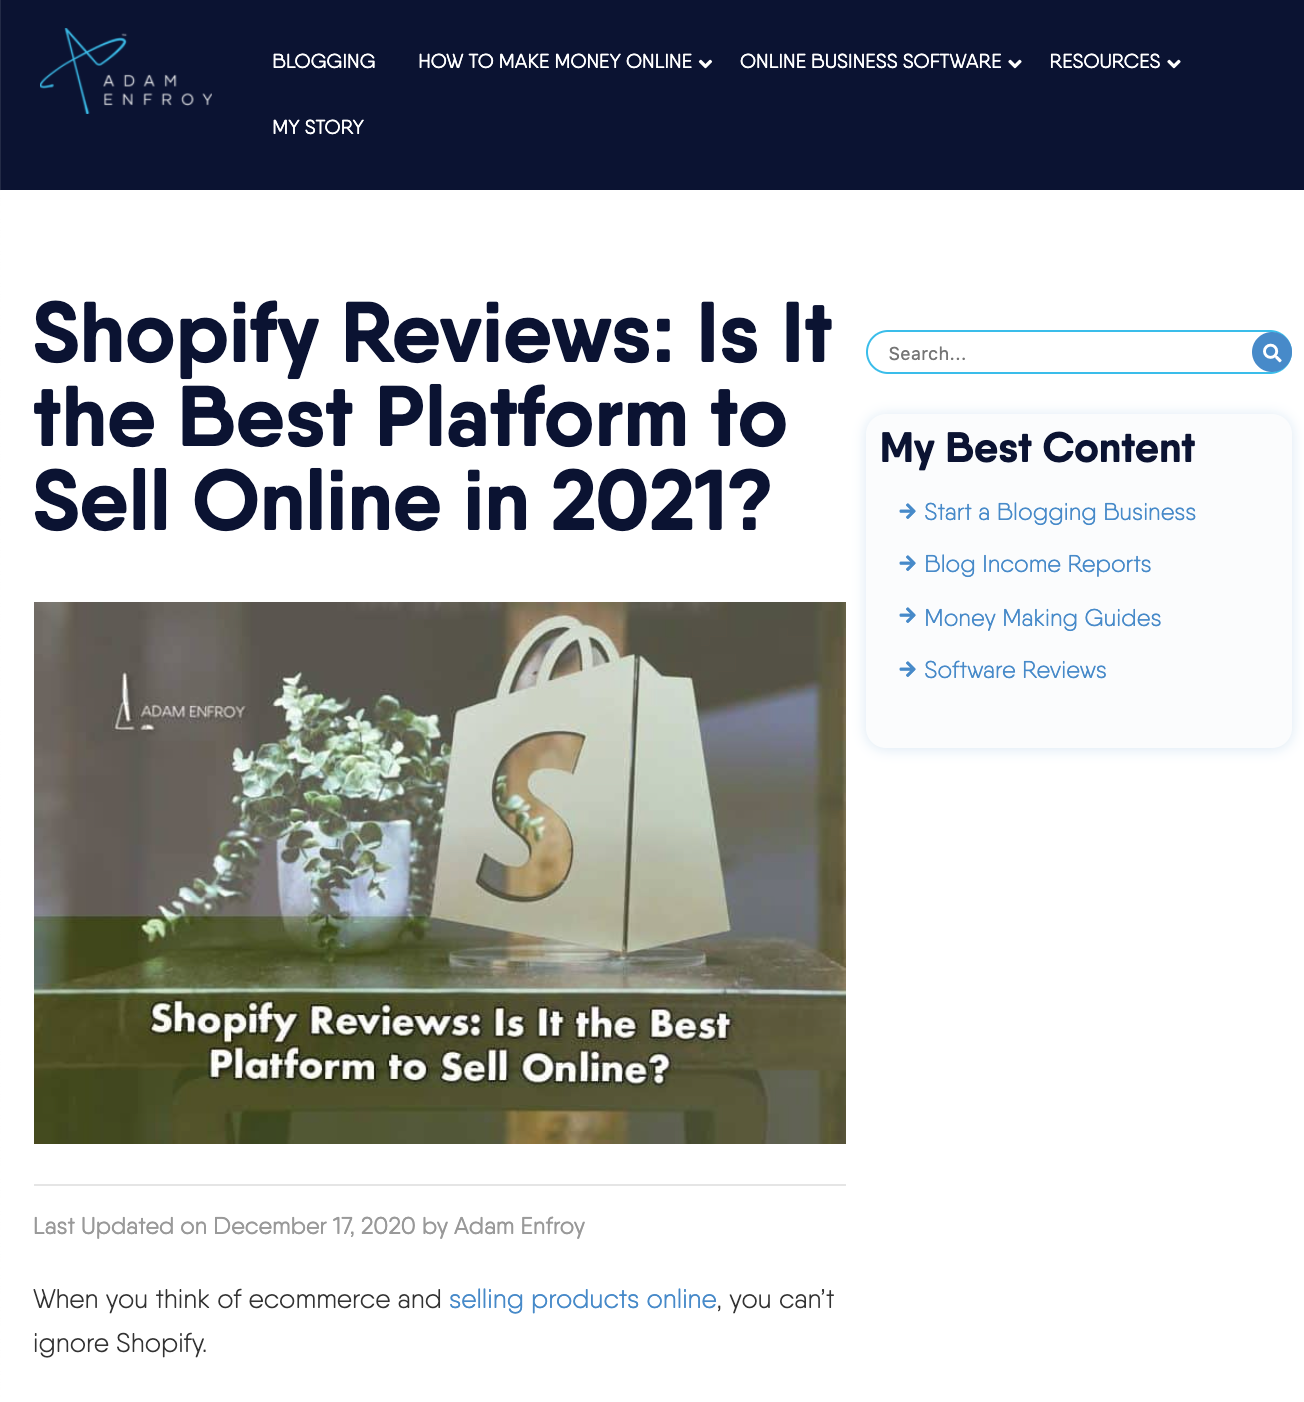 Home Business Ideas: Adam Enfroy – Shopify Review